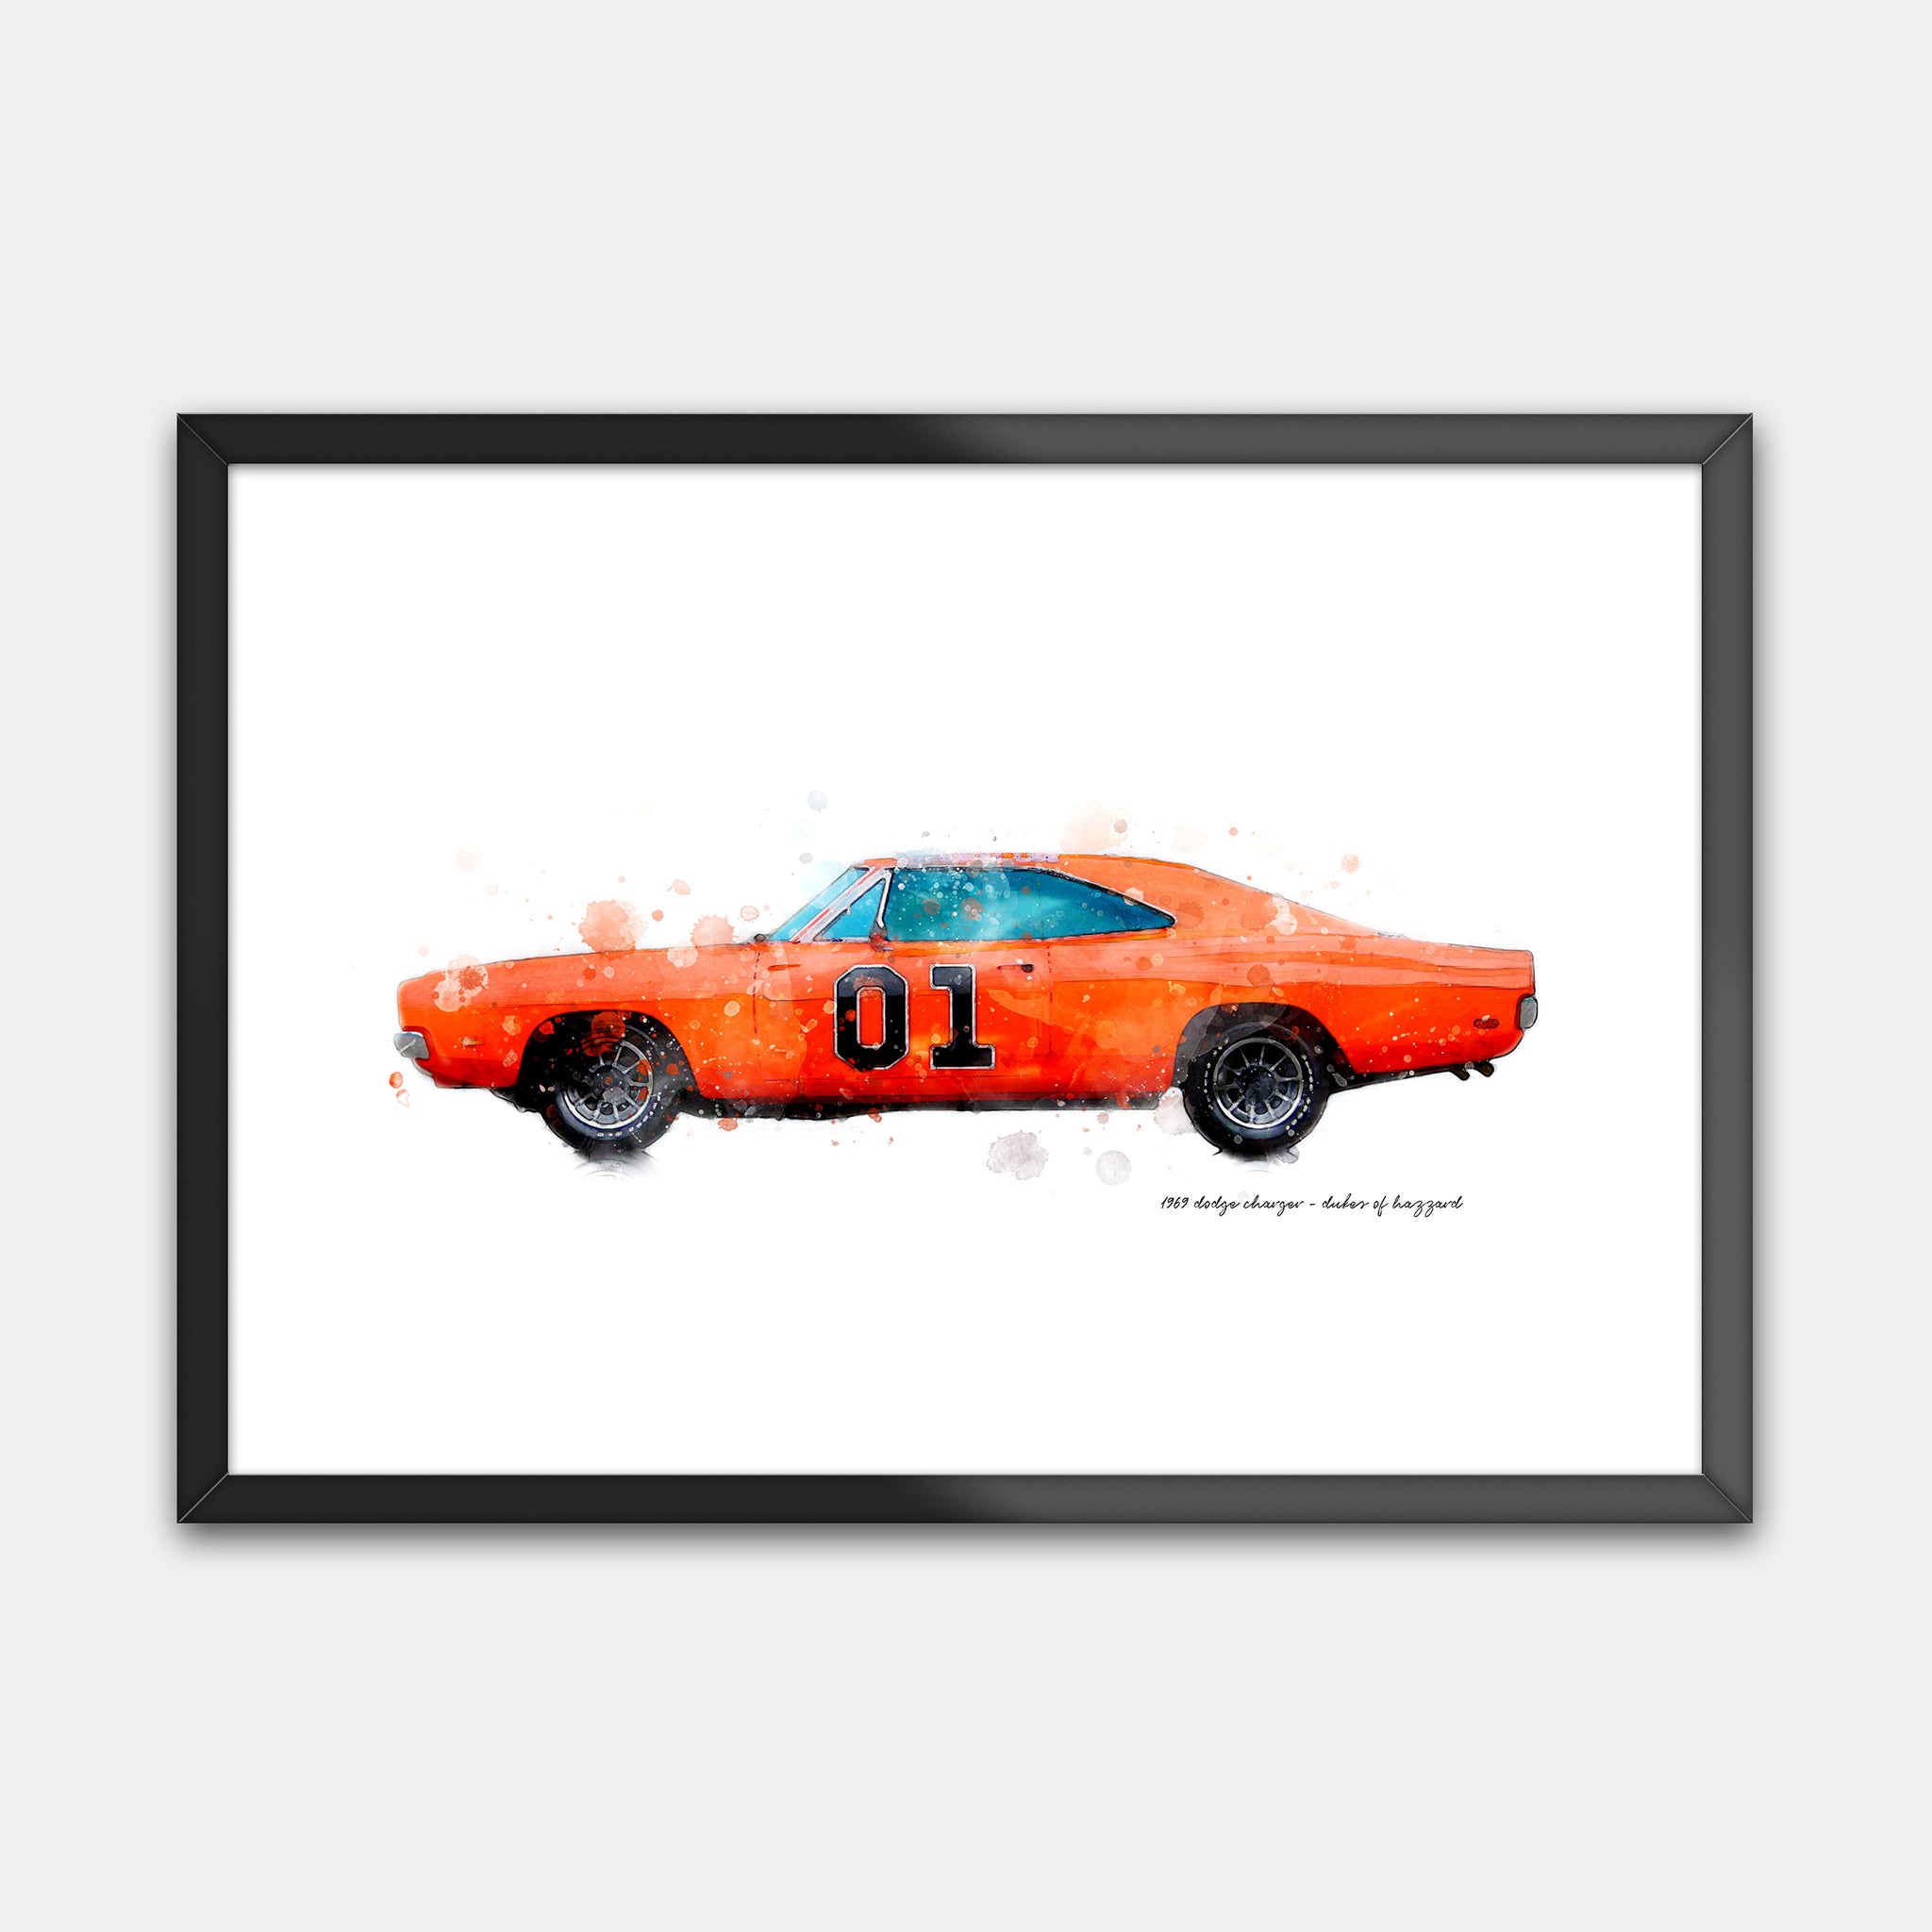 1969 Dodge Charger - "Dukes of Hazzard"